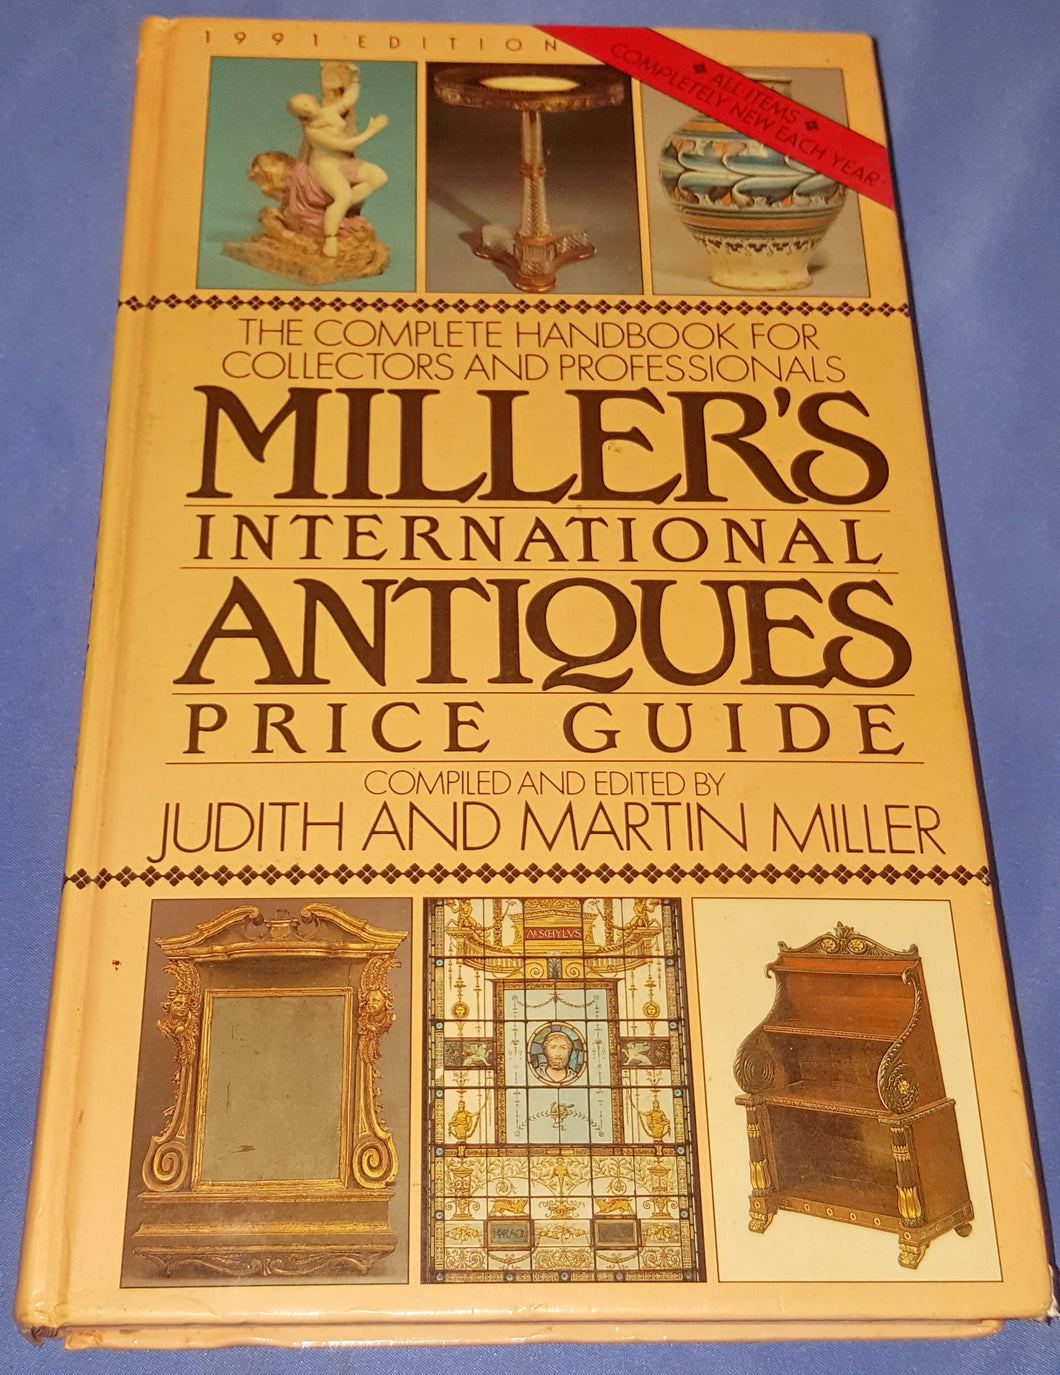 Millers' International Antiques Price Guide: 1991 Edition Hardcover